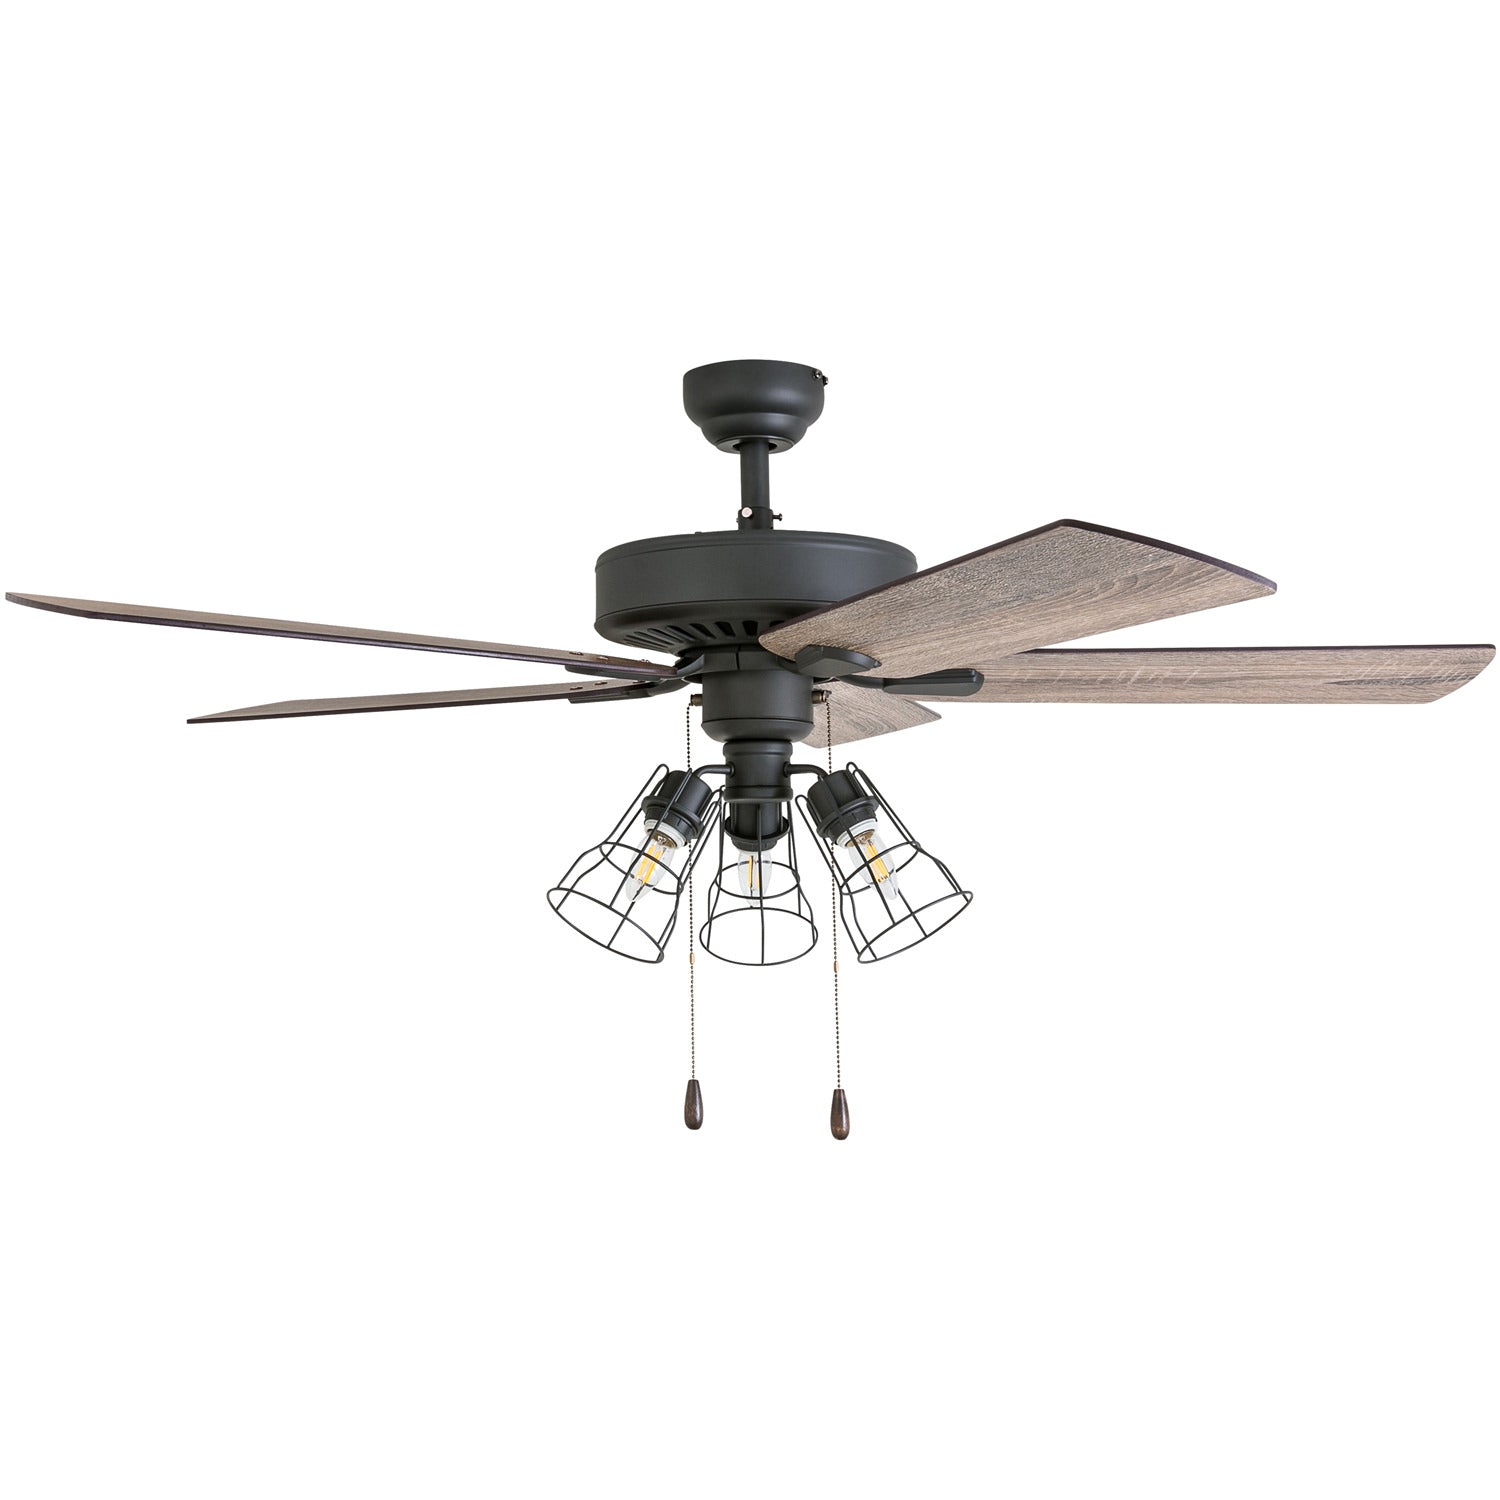 52 Inch Inland Seas, Bronze, Remote Control, Ceiling Fan by Prominence Home